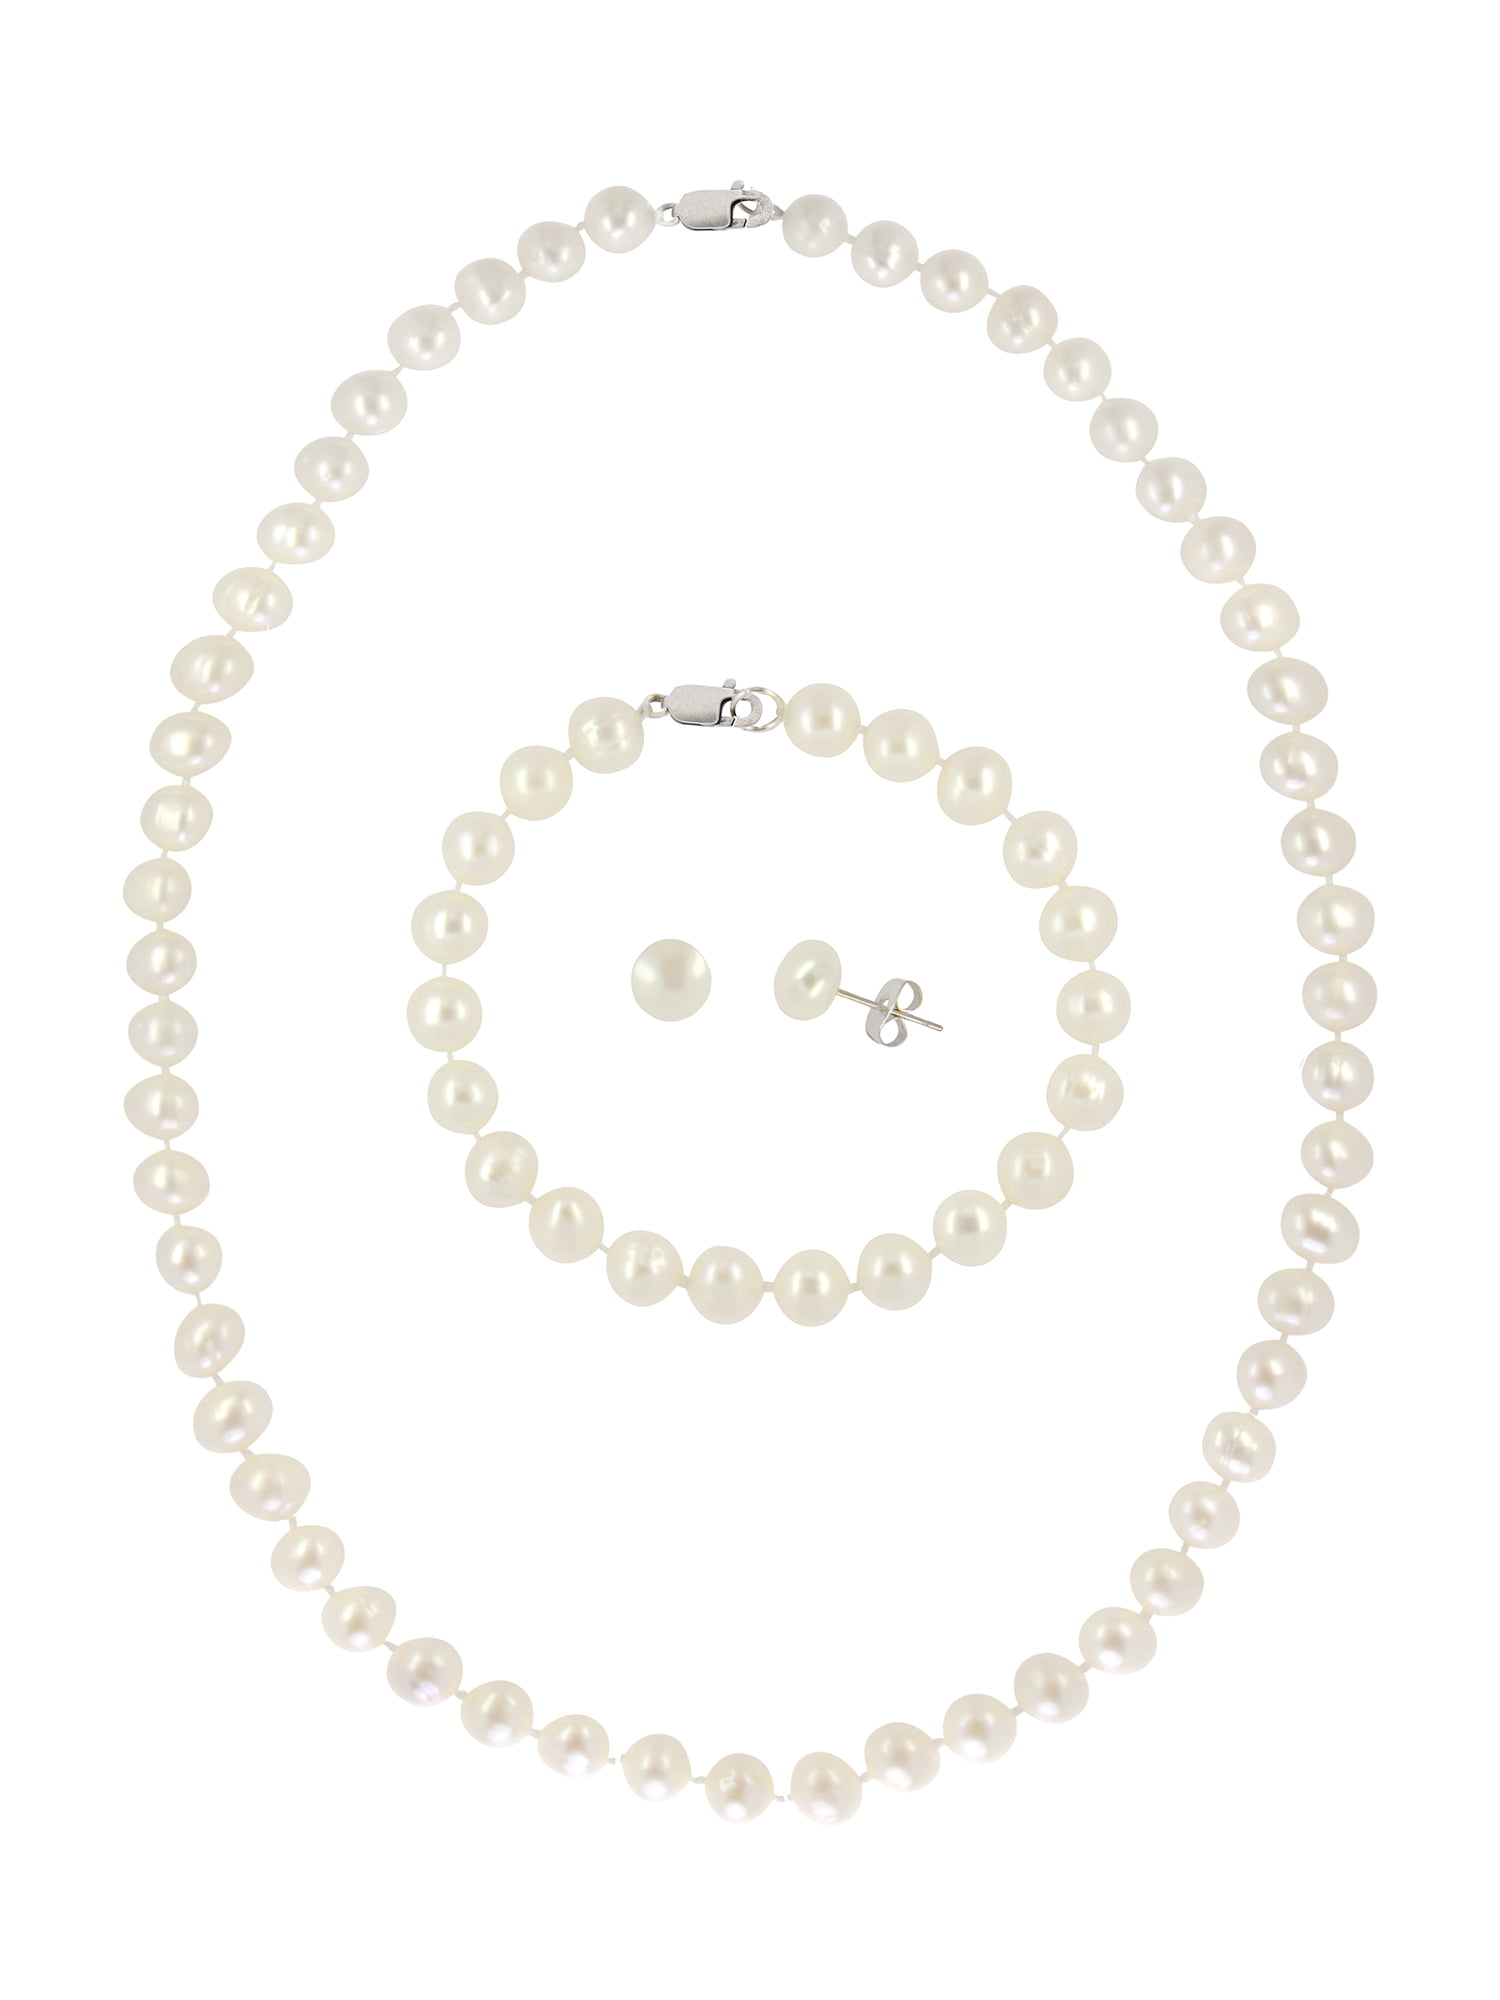 Honora 8-9mm Ringed FW Pearl Convertible Necklace & Bracelet in Sterling Silver